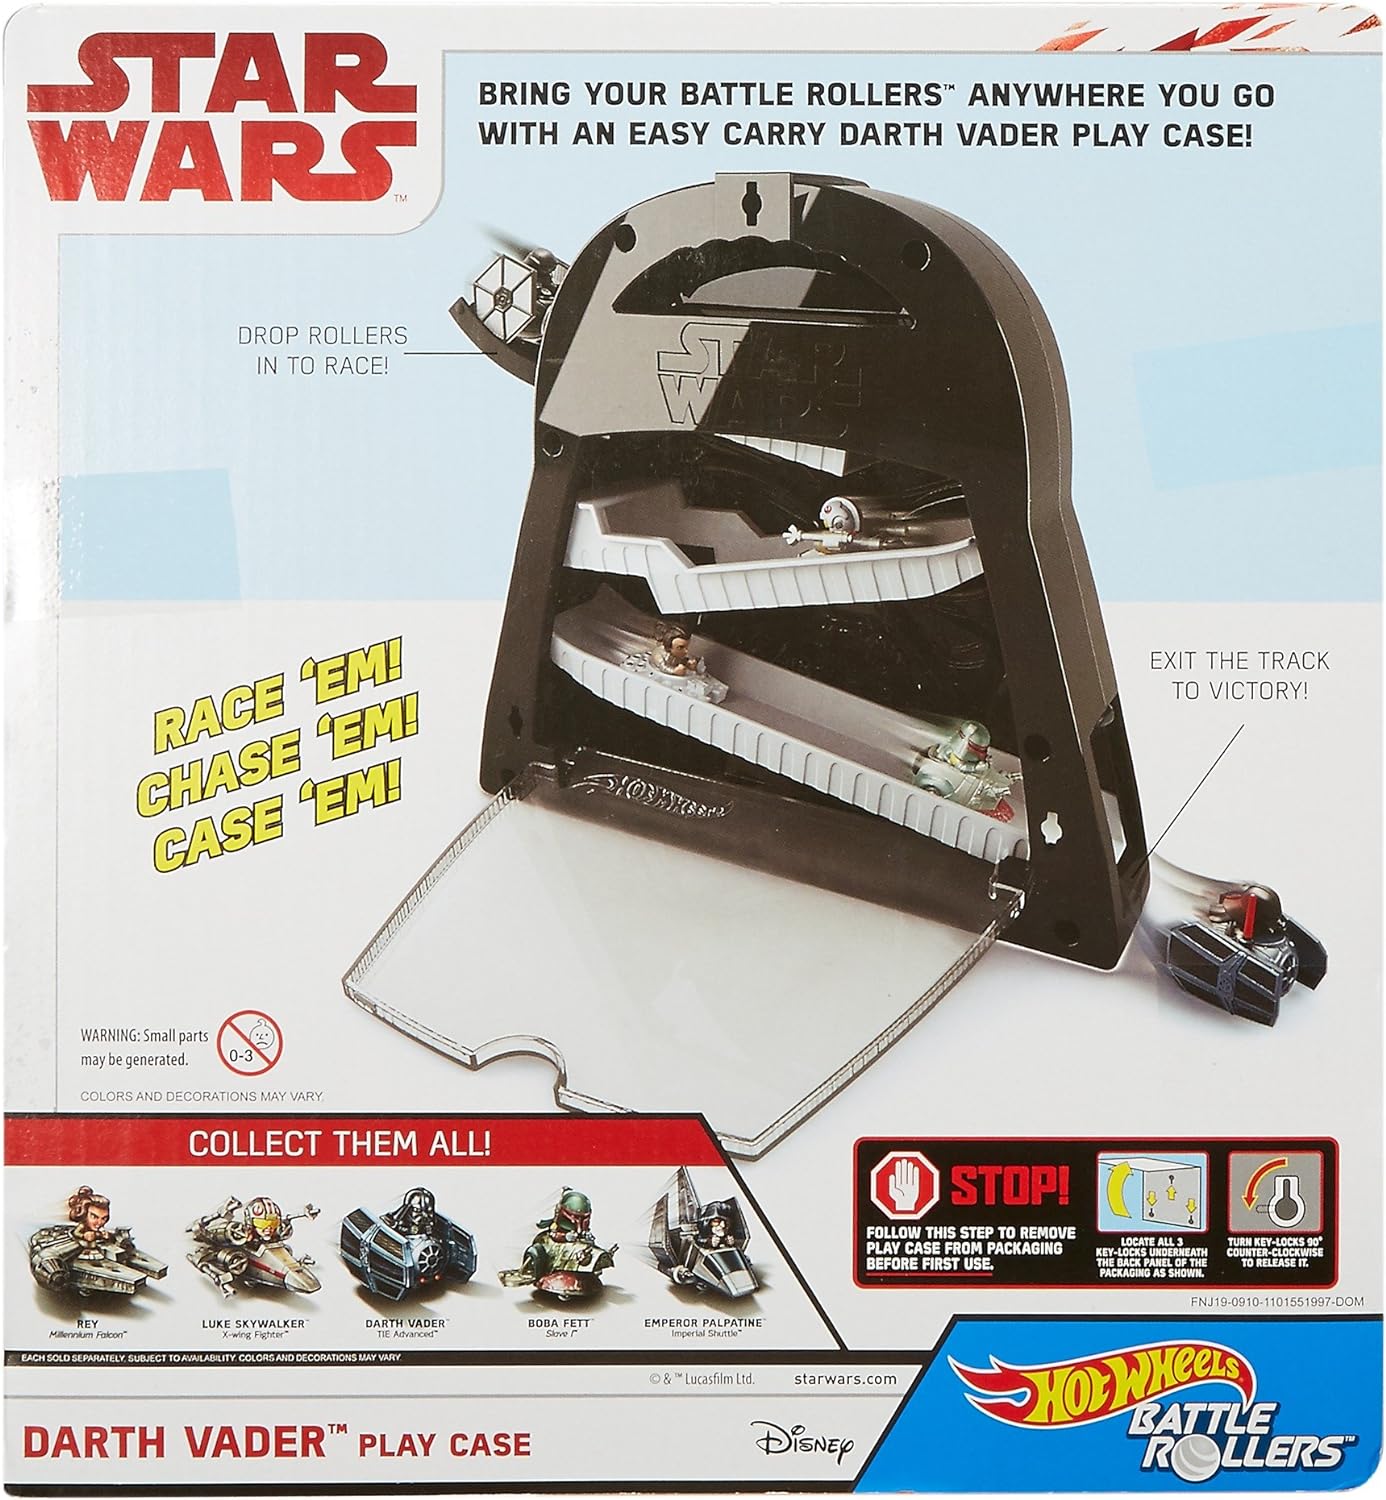 Mattel 2017 Star Wars Hot Wheels Battle Rollers - Darth Vader Play Case With Exclusive Darth Vader Tie Fighter Battle Roller - Brand New Factory Sealed Shop Stock Room Find